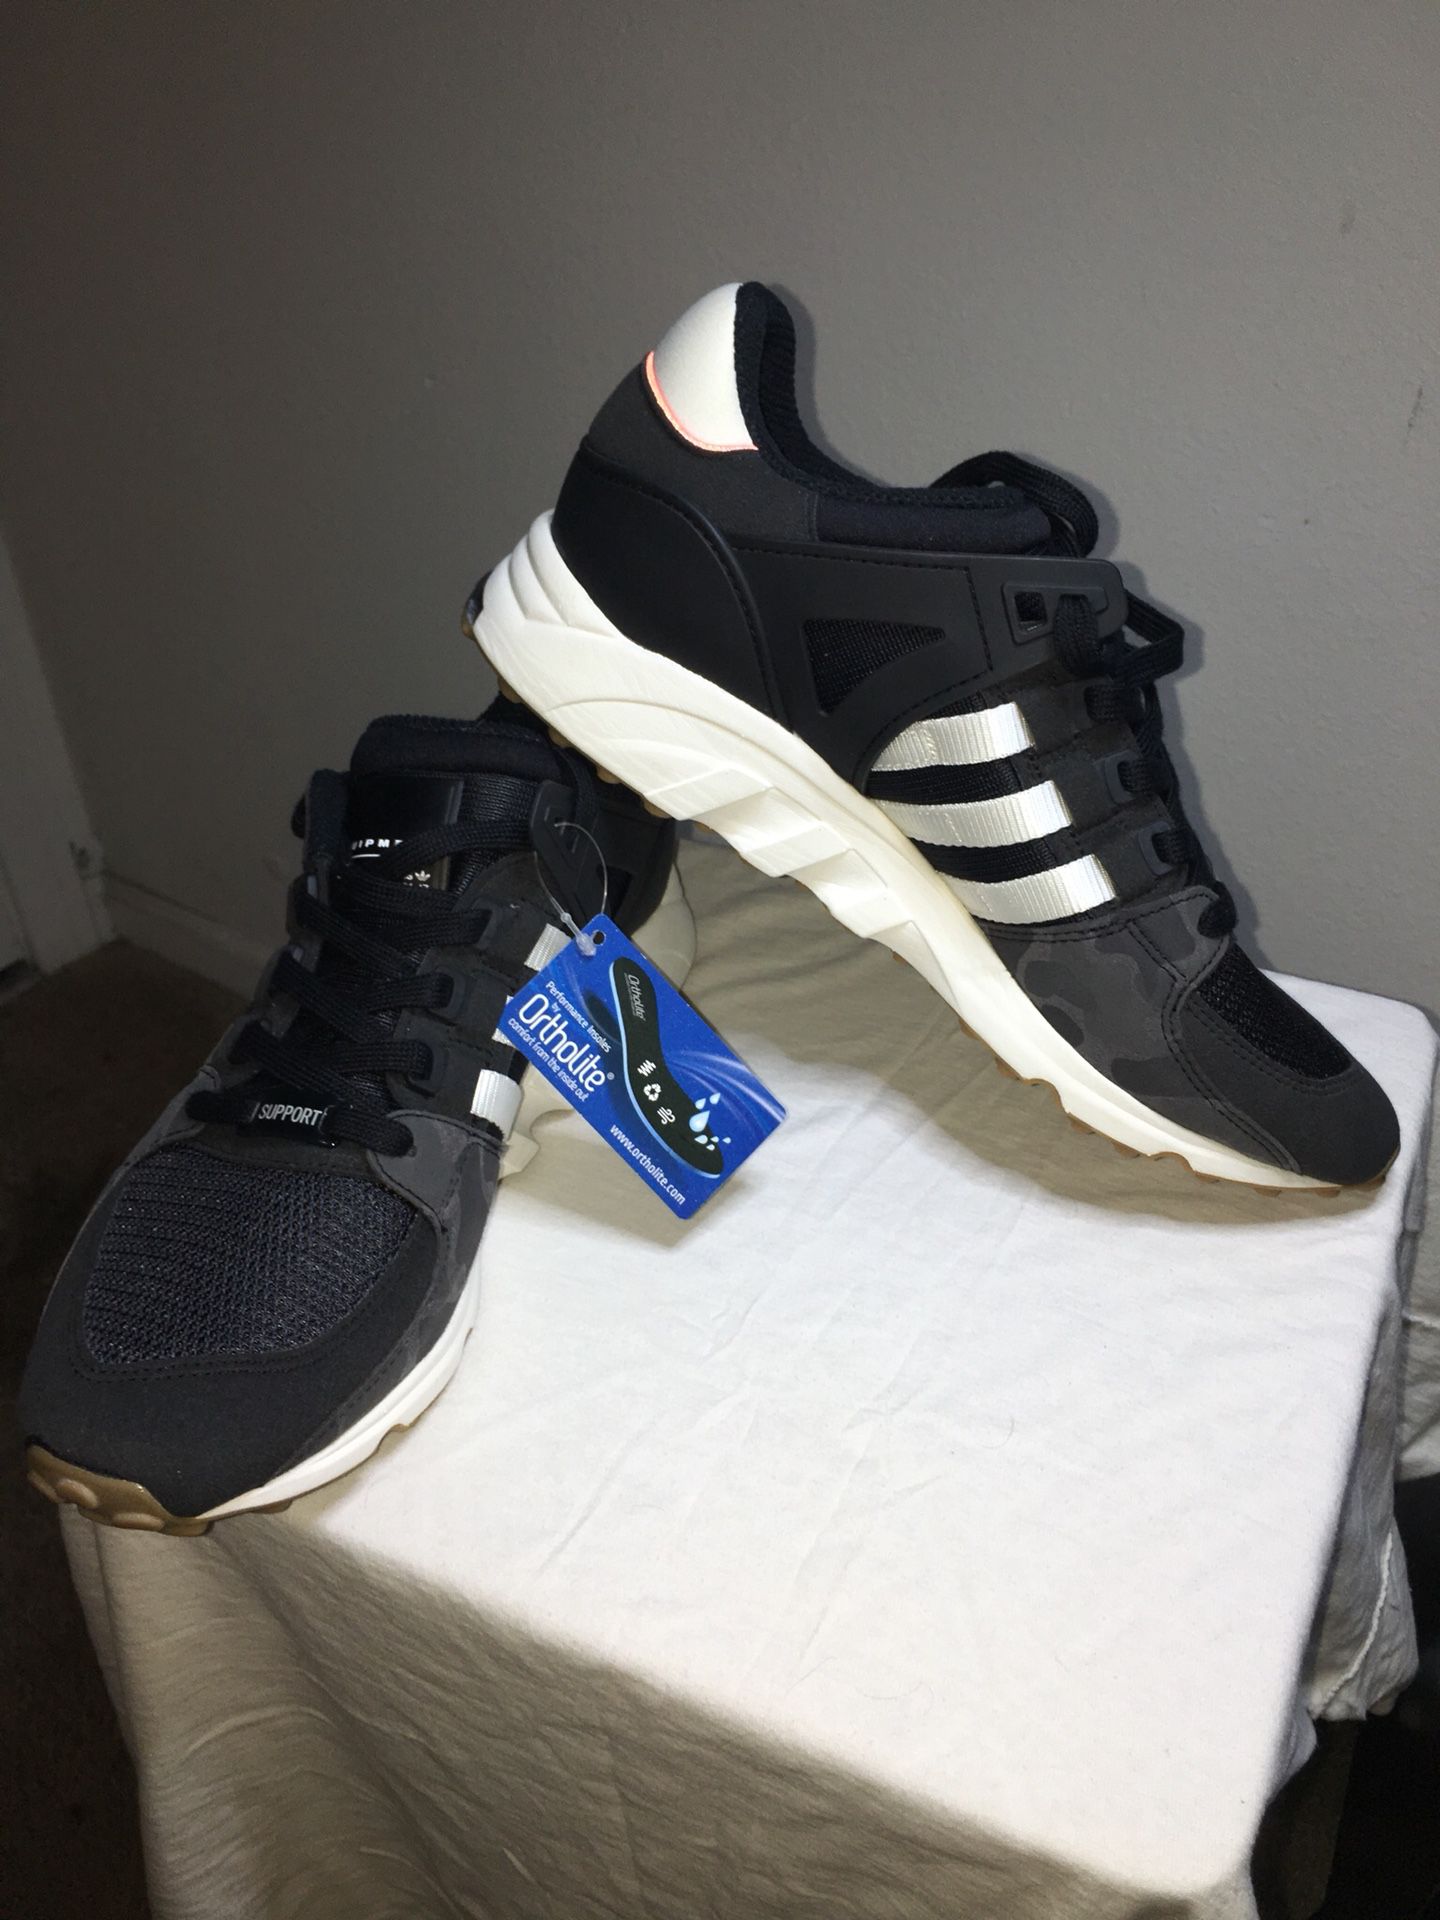 Adidas $150 Retail Men's Size 9 EQT Support RF BB1324 Core Black White Camo for Sale in Riverside, CA - OfferUp